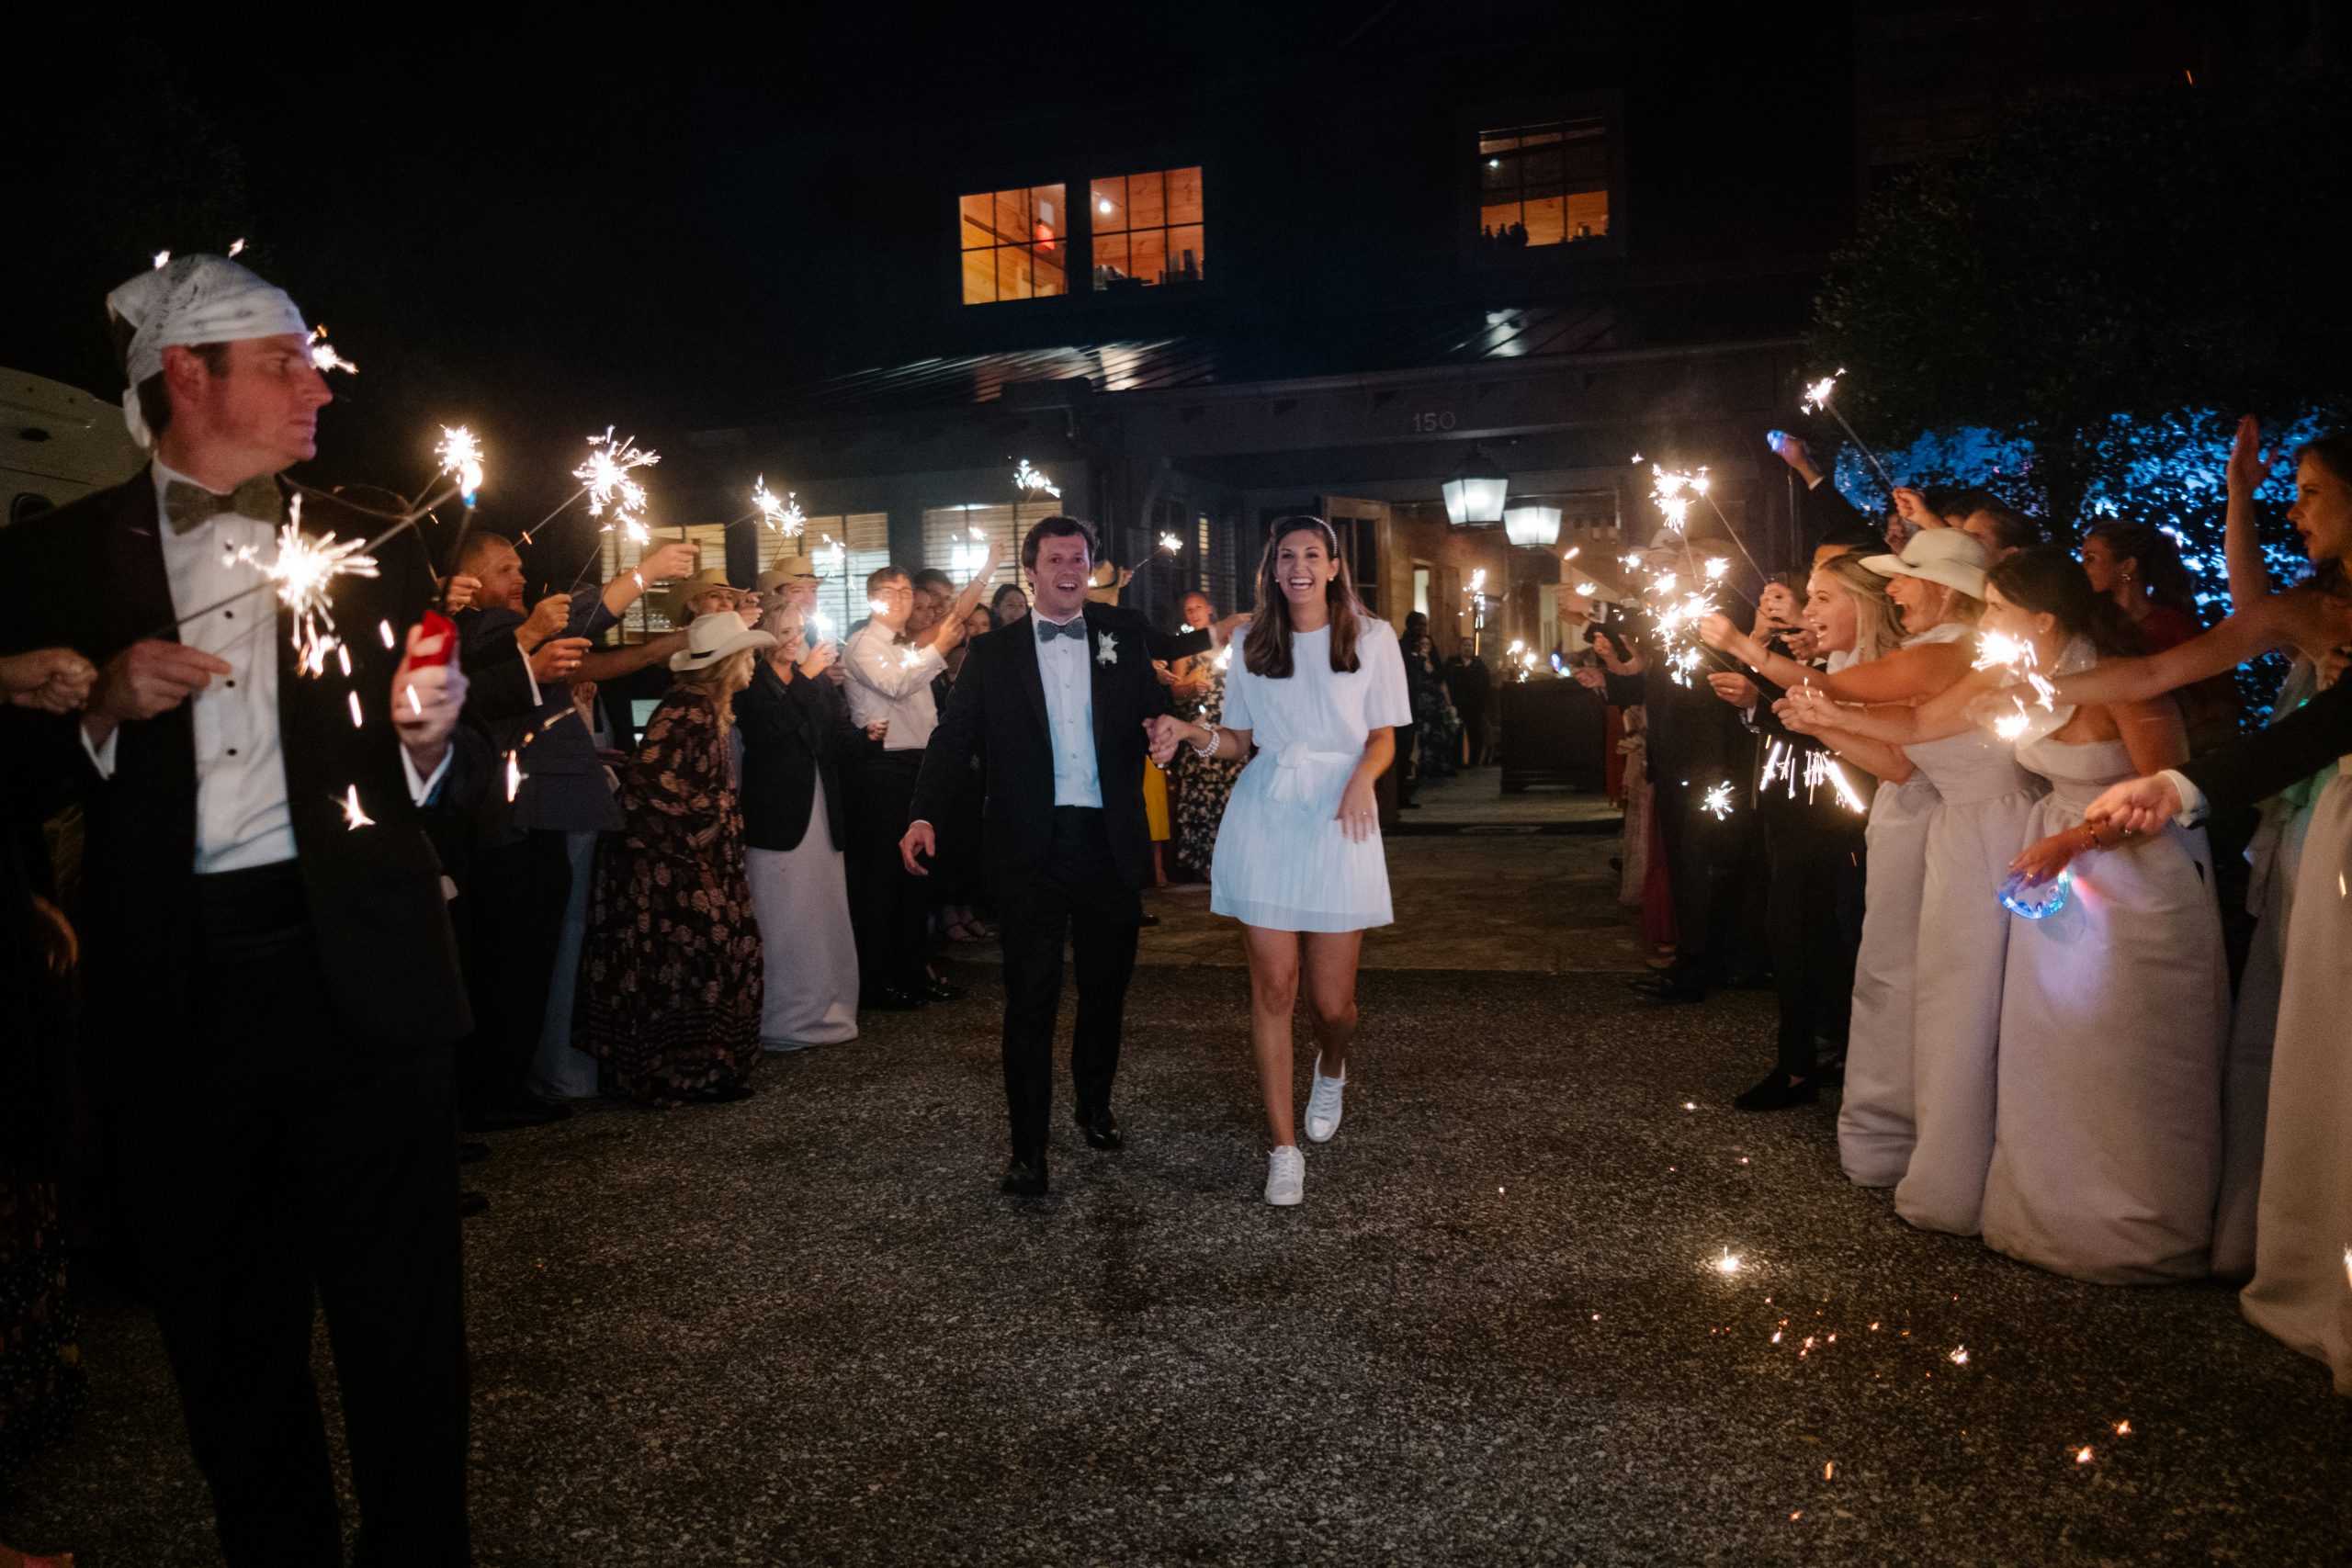 After all the dancing, Paige found tennis shoes a chic-comfy option as they left amid a sea of sparklers.
